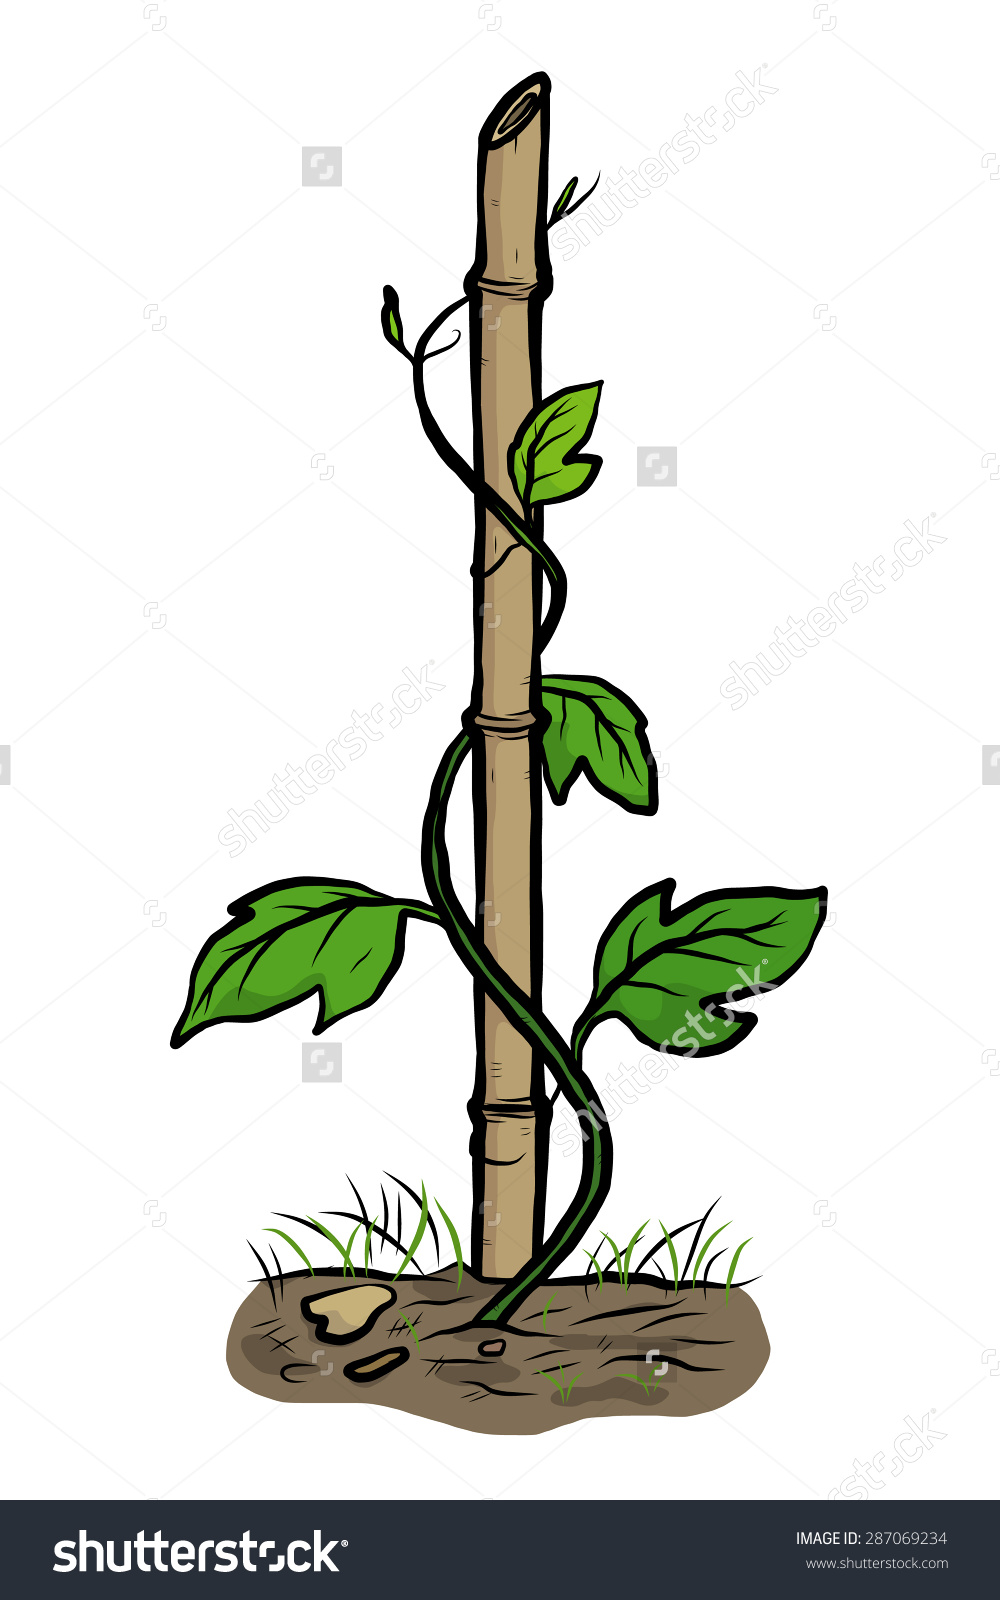 Climbing plants clipart - Clipground